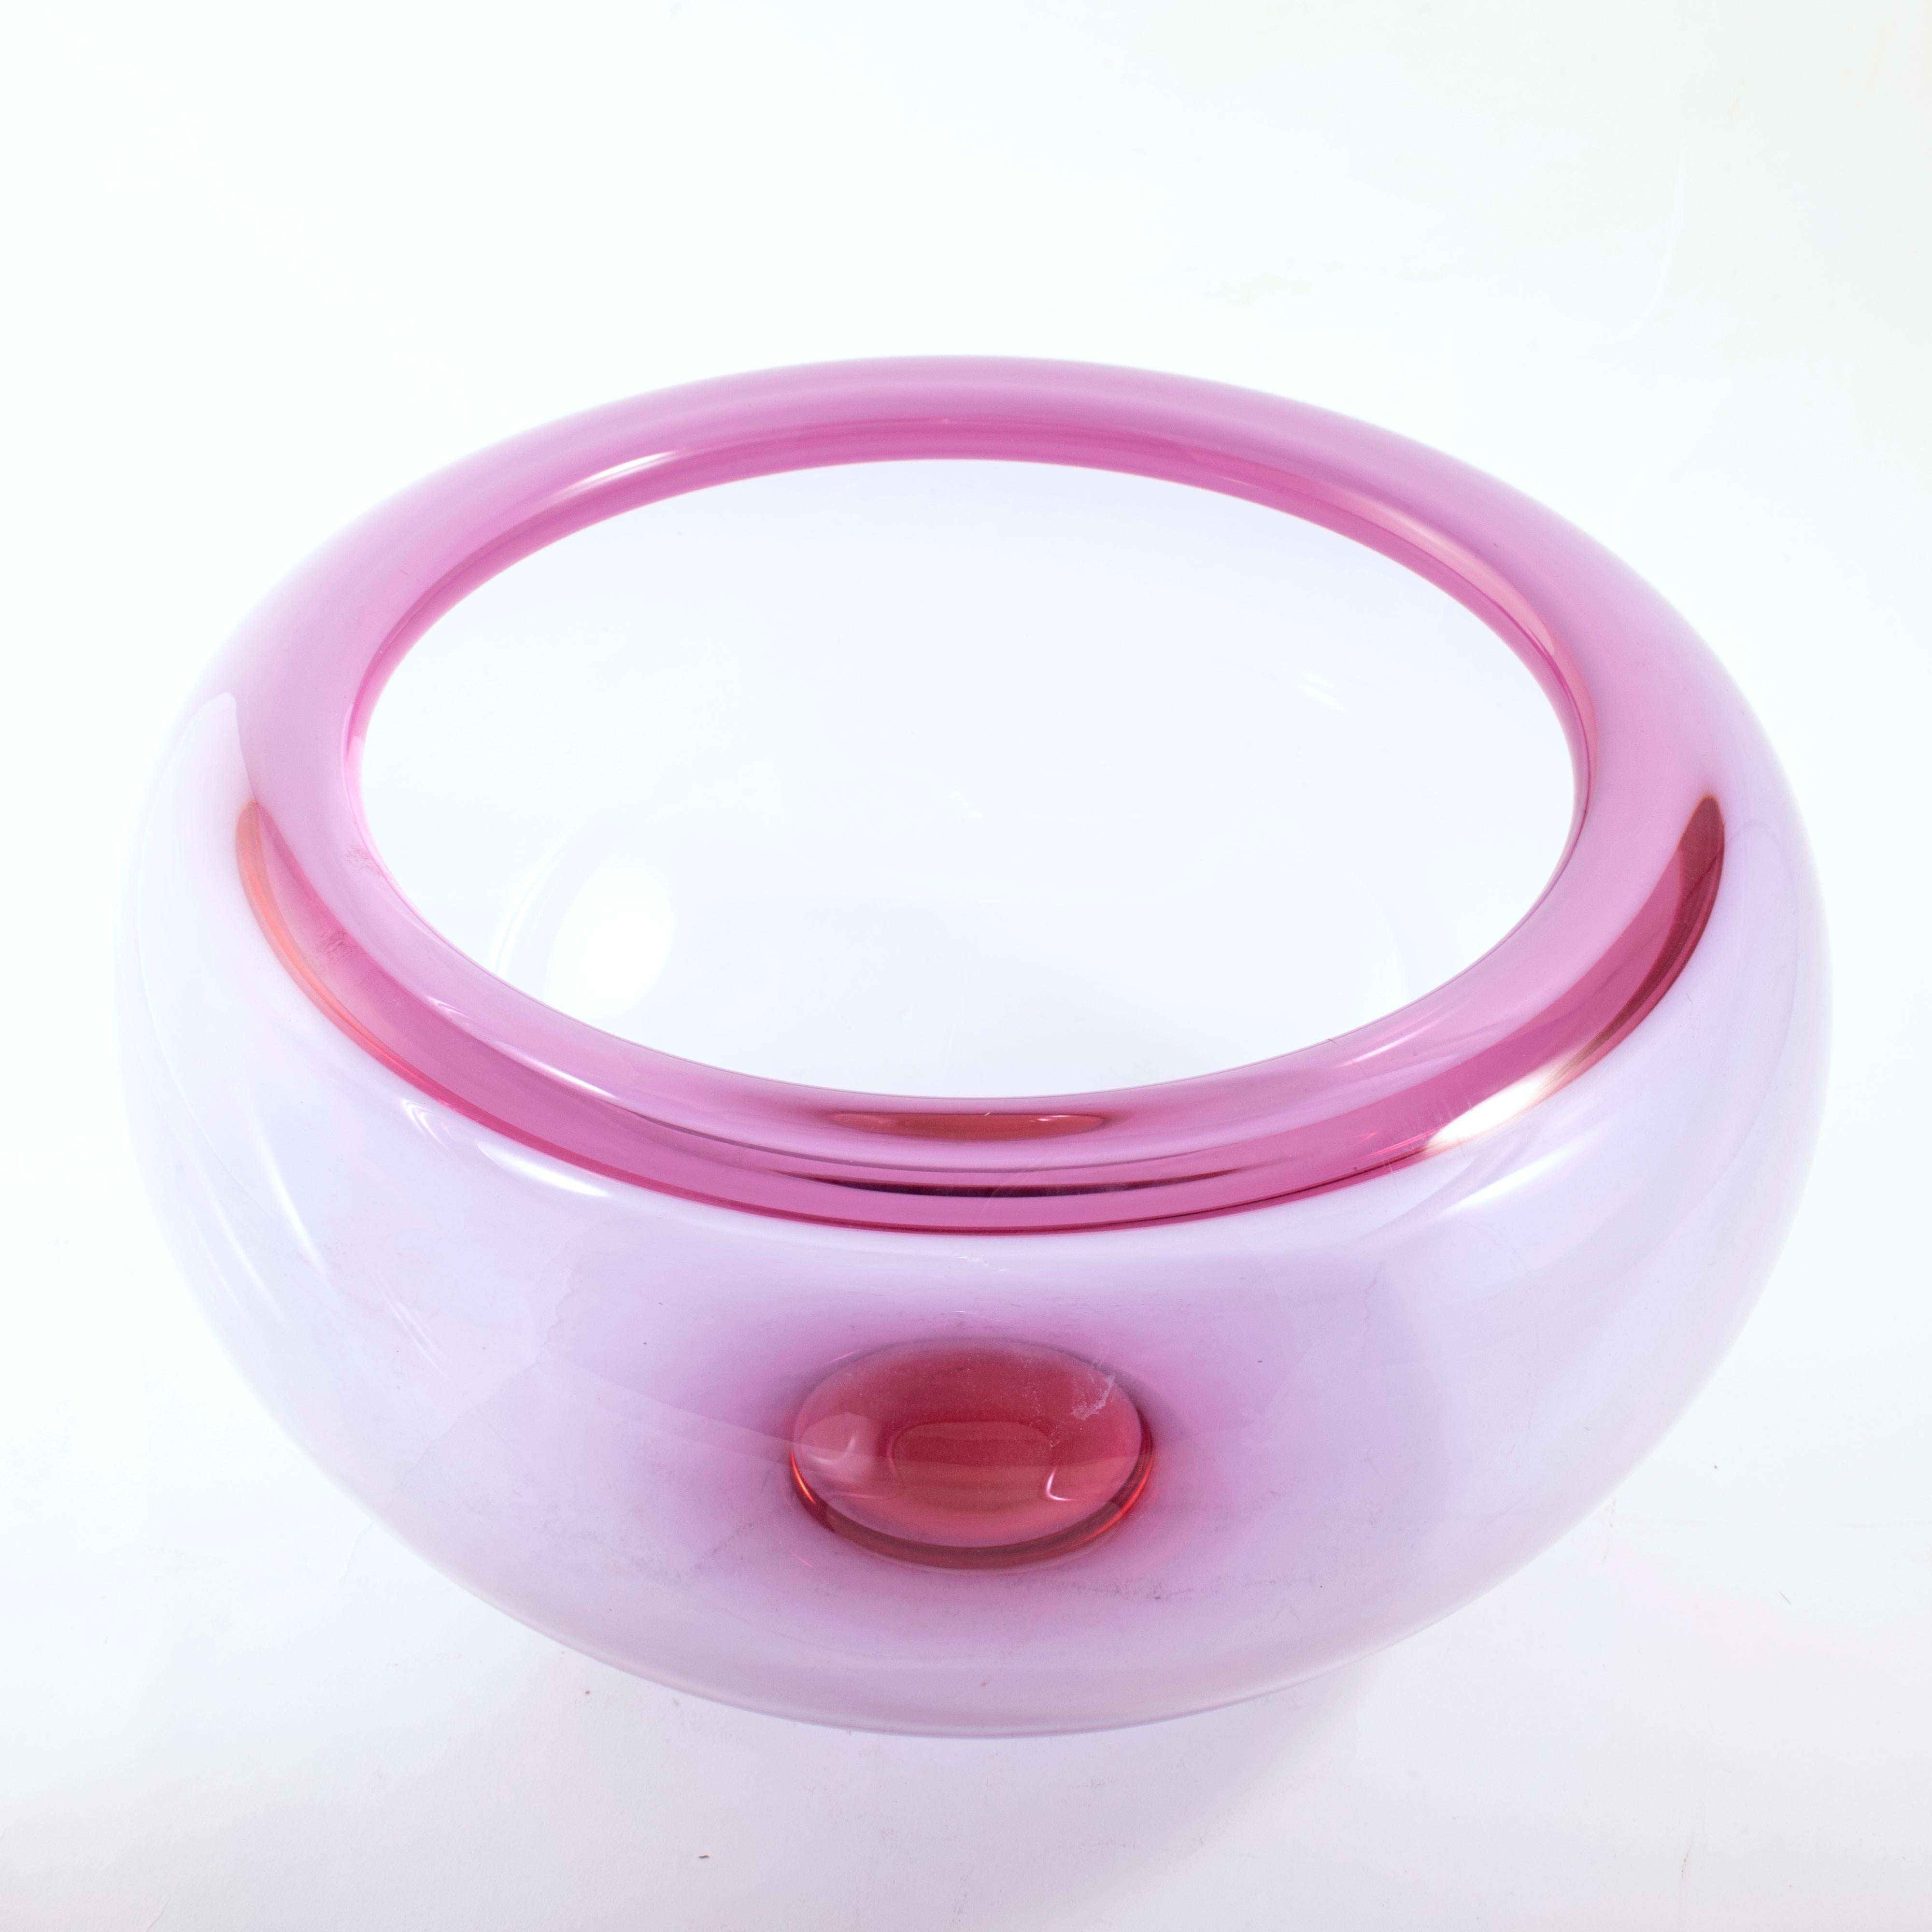 A pink glass bowl designed by Per Lütken for Holmegaard, Denmark, circa 1960s.
Per Lütken (1916-1998) was a Danish glassmaker, most famous for his works at Holmegaard Glass Factory. He worked at the Holmegaard Glass Factory from 1942 until his